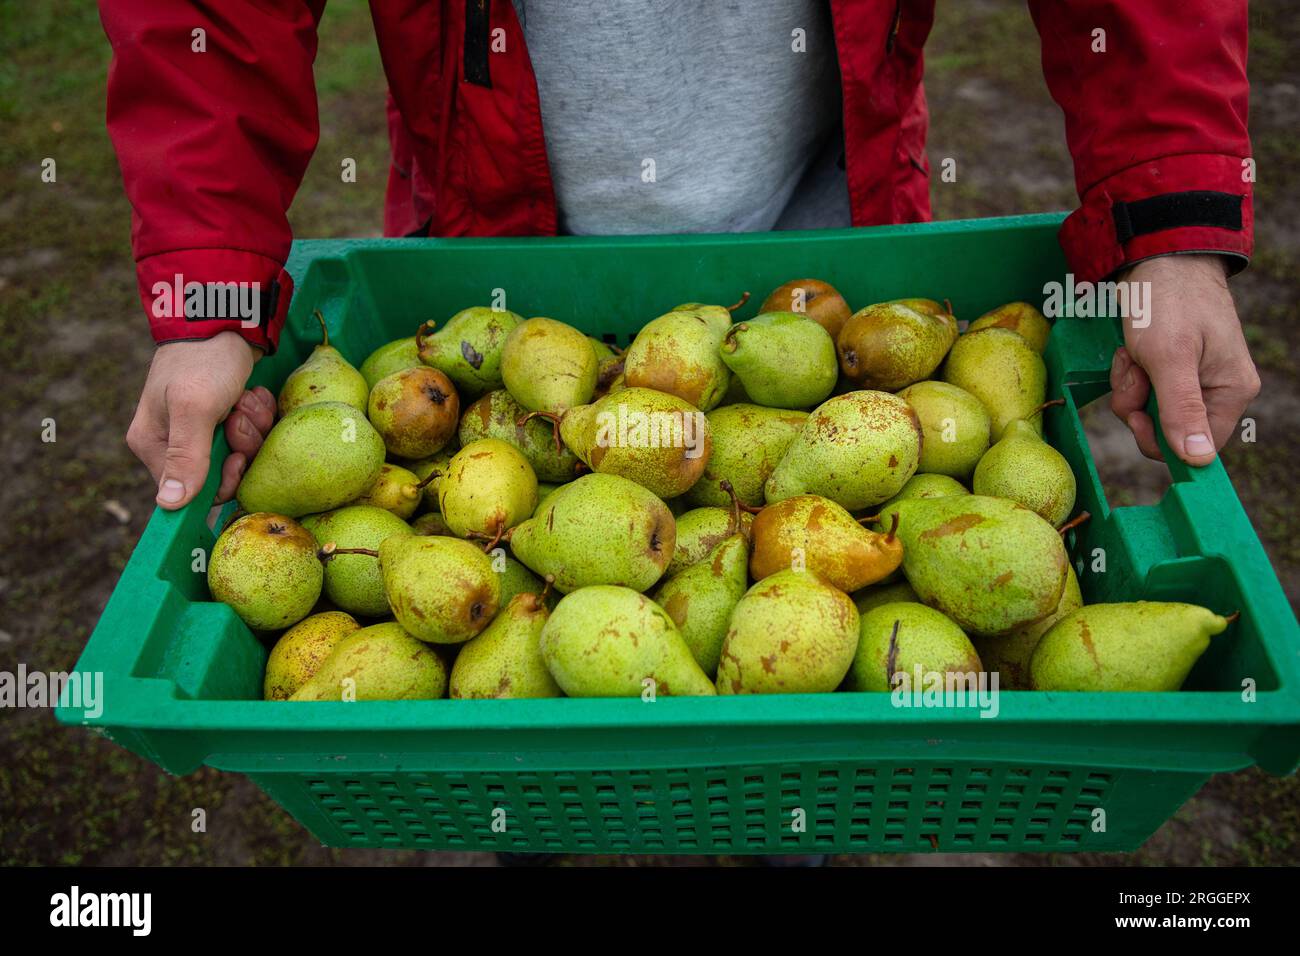 https://c8.alamy.com/comp/2RGGEPX/box-full-of-delicious-ripe-yellow-green-pears-in-male-hands-2RGGEPX.jpg